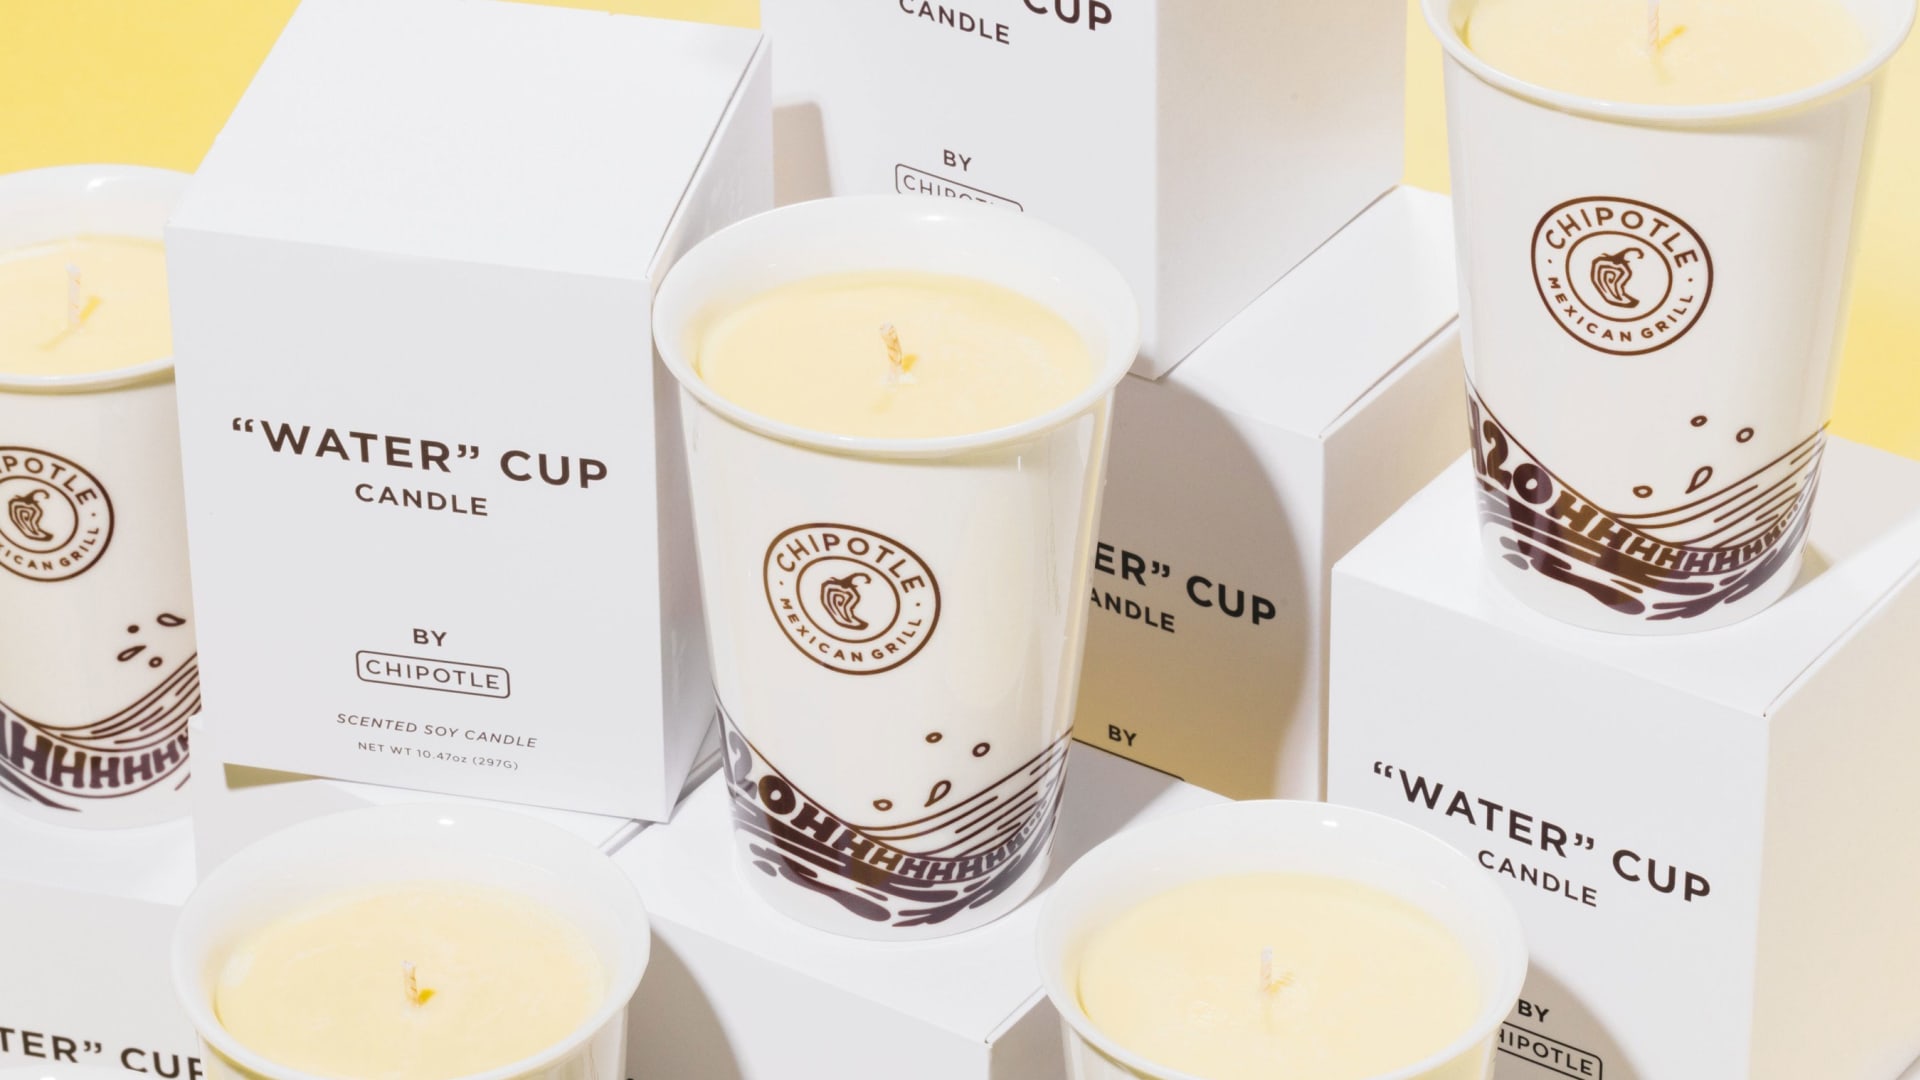 Chipotle launched a new lemonade-scented candle inspired by fans who "accidentally" fill their water cups with lemonade.